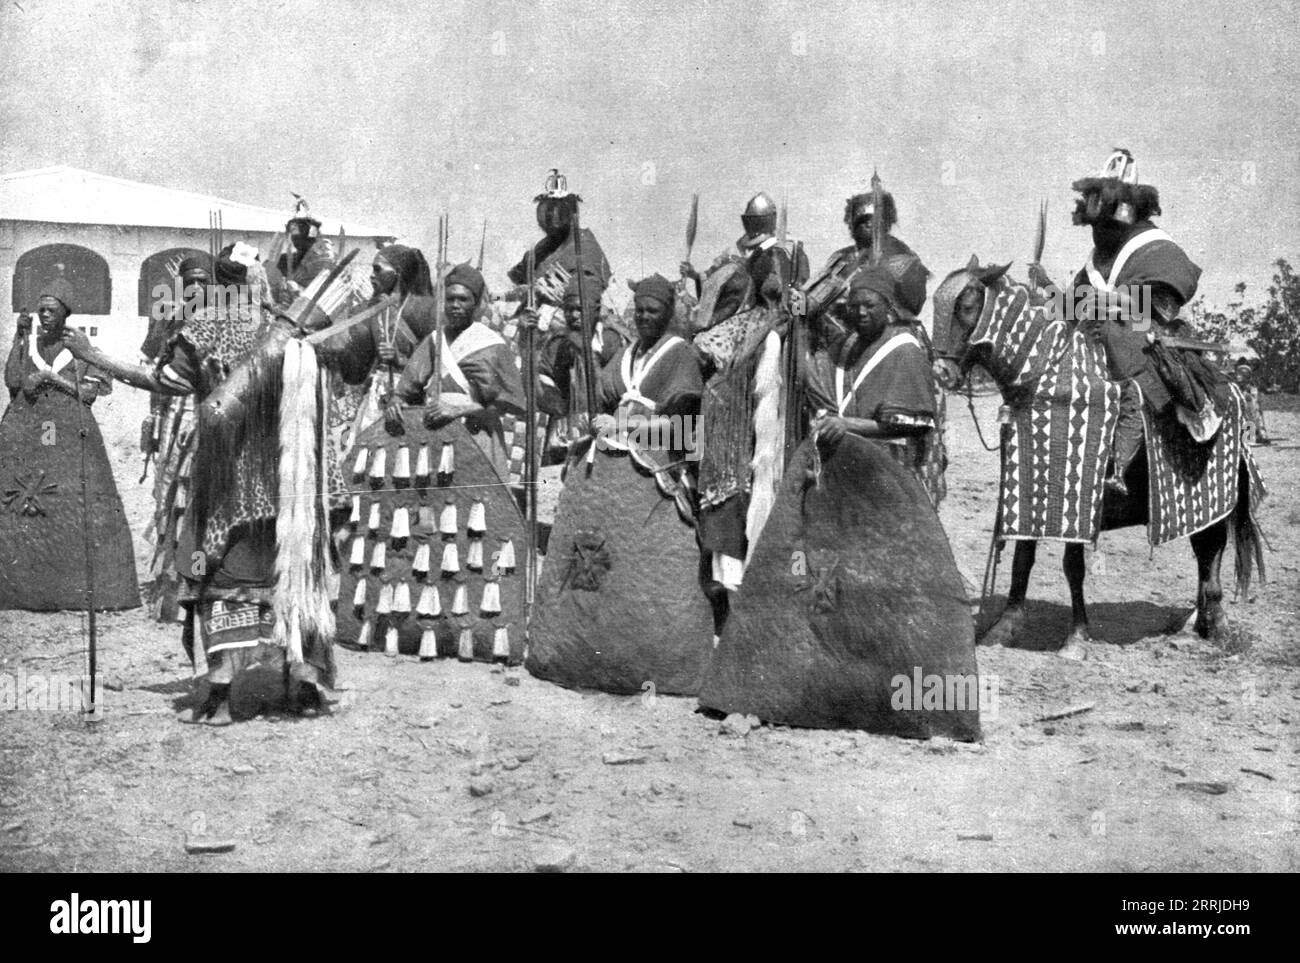 'Distant Fronts, In Cameroon; Escort of the lamido of Rey Bouba, the greatest black king of Cameroon, who came to greet Colonel Brisset; shield bearers and men-at-arms wearing authentic traditional dresss', 1917. From &quot;L'Album de la Guerre 1914-1919, Volume 2&quot; [L'Illustration, Paris, 1924]. Stock Photo